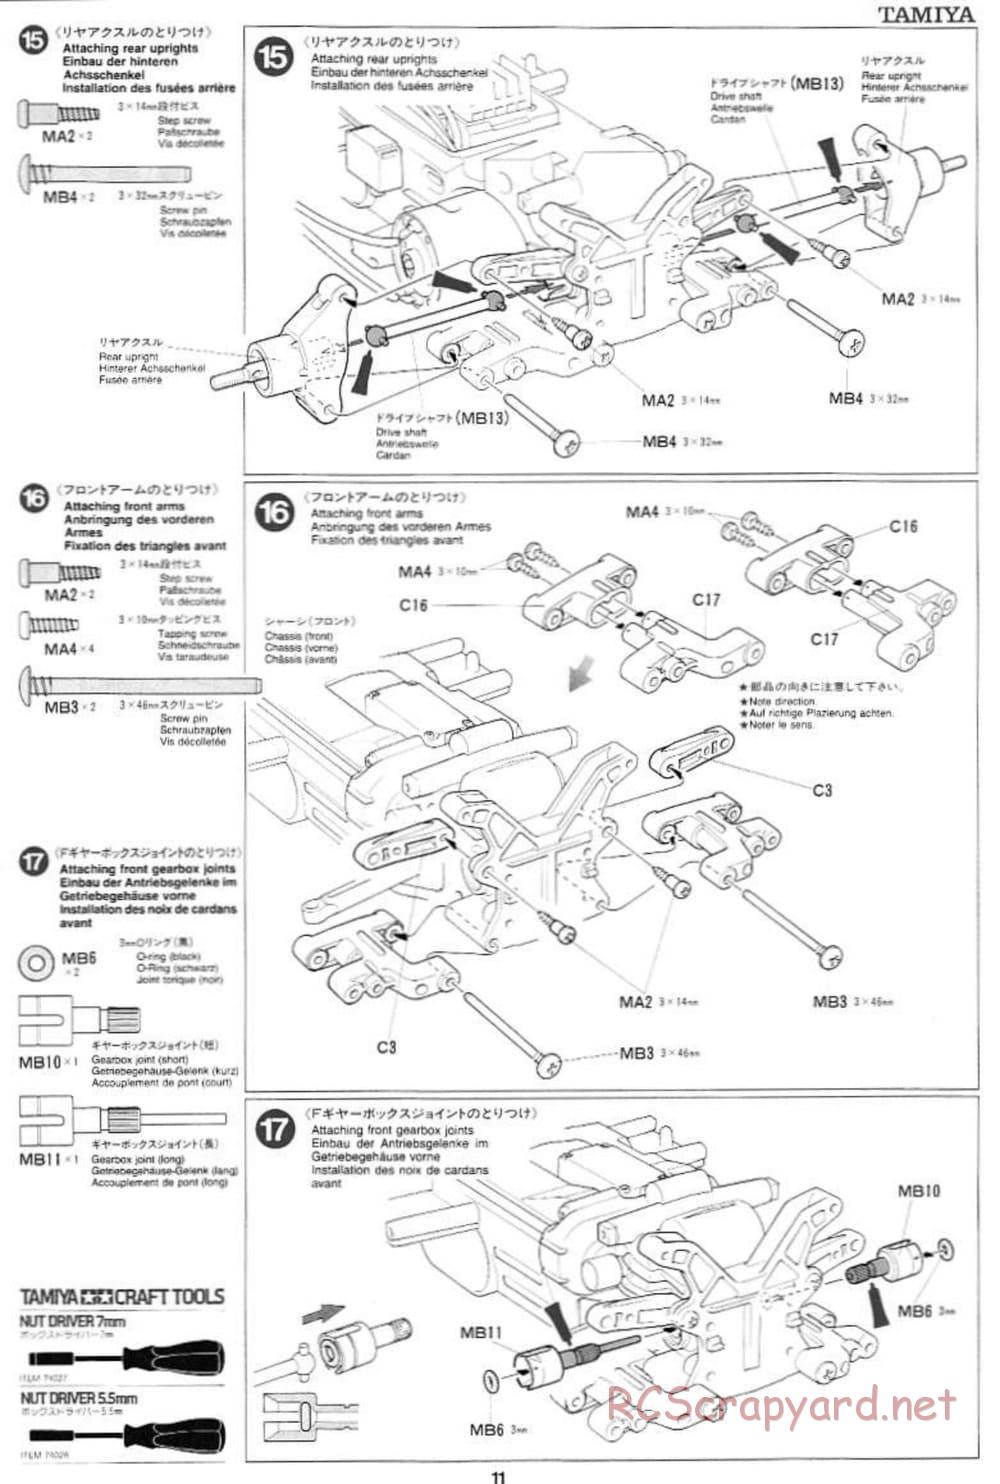 Tamiya - Pennzoil Nismo GT-R - TL-01 Chassis - Manual - Page 11